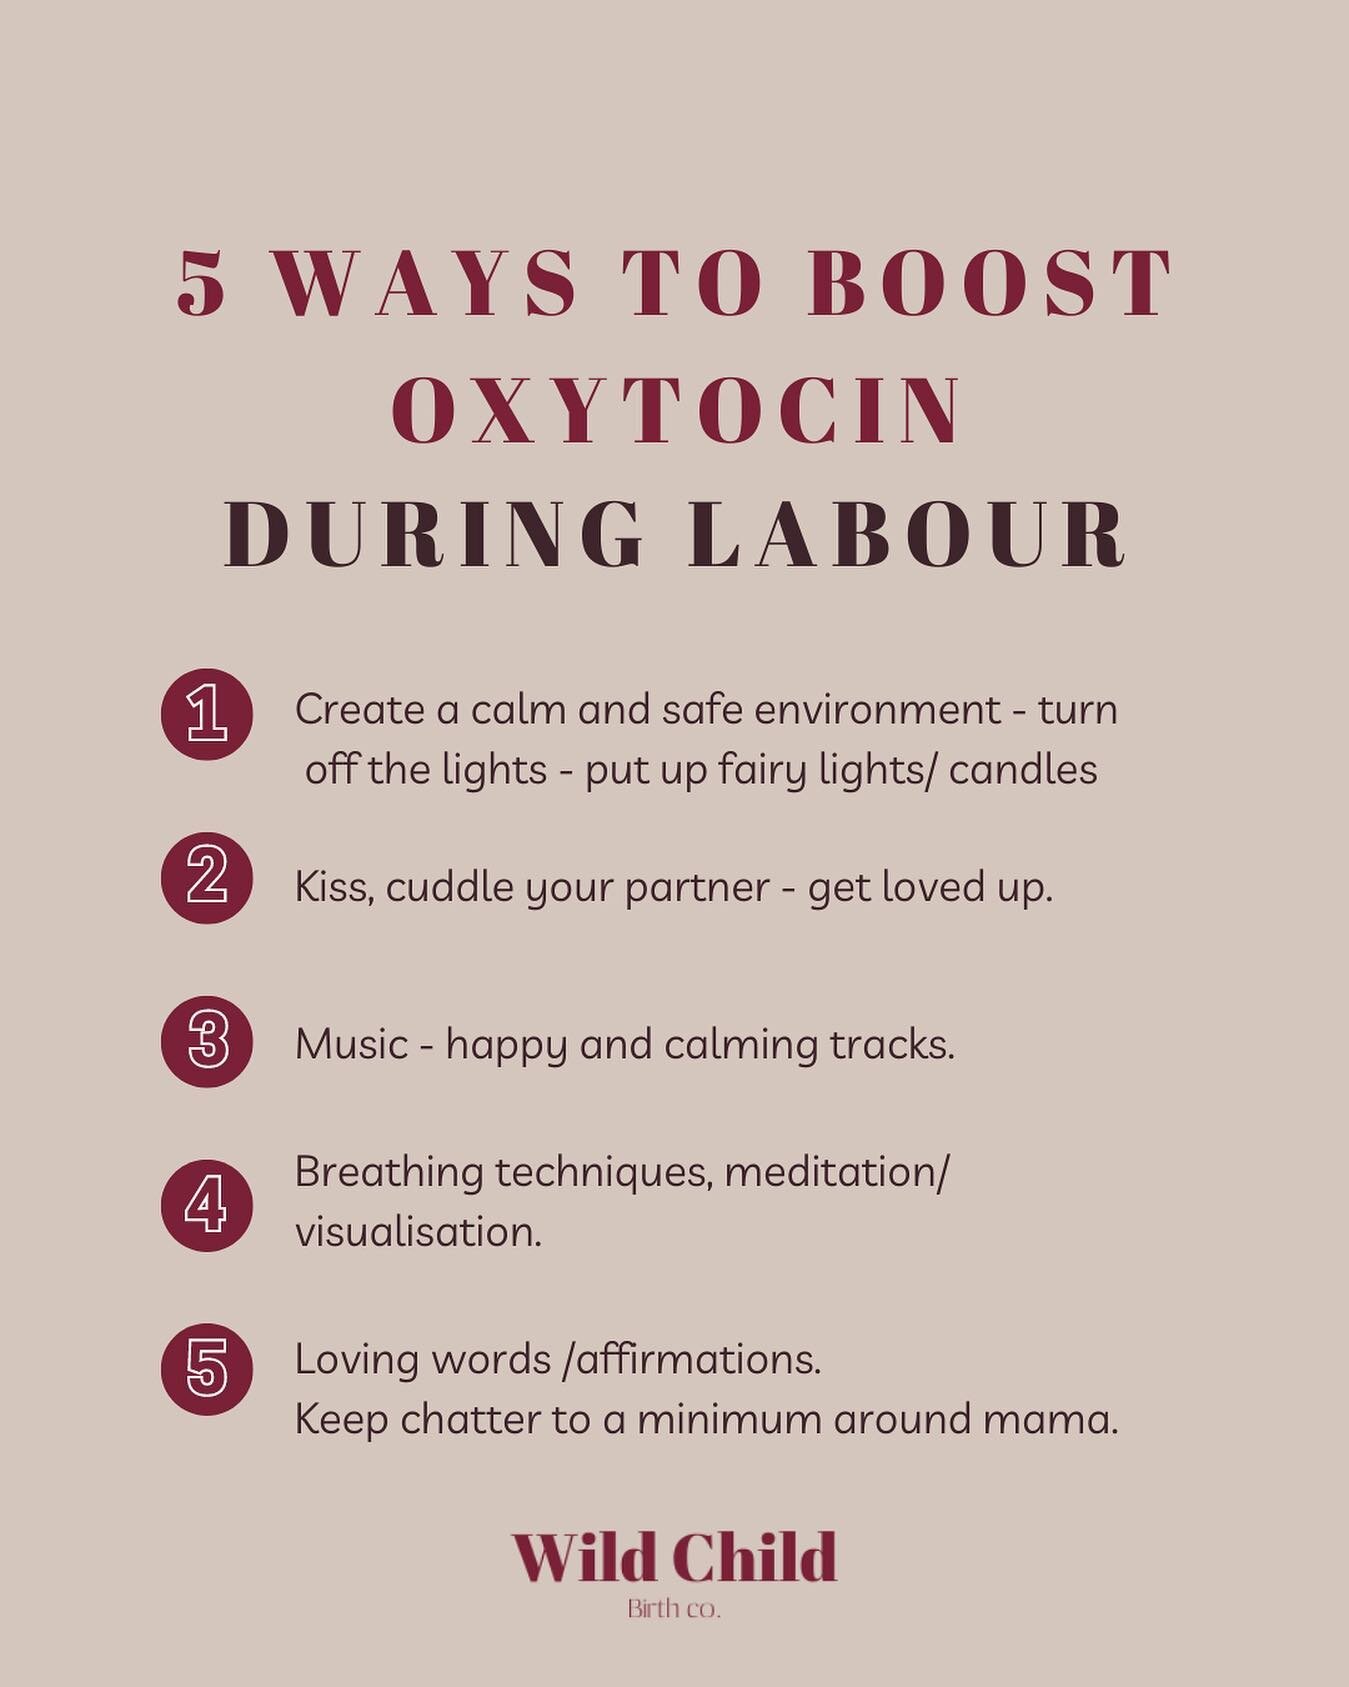 Save this post for later! 

Keeping the oxytocin flowing during labour is so important- especially if you are transferring from home to hospital. A sense of safety is needed because birthing women can stop their own labour if they feel threatened or 